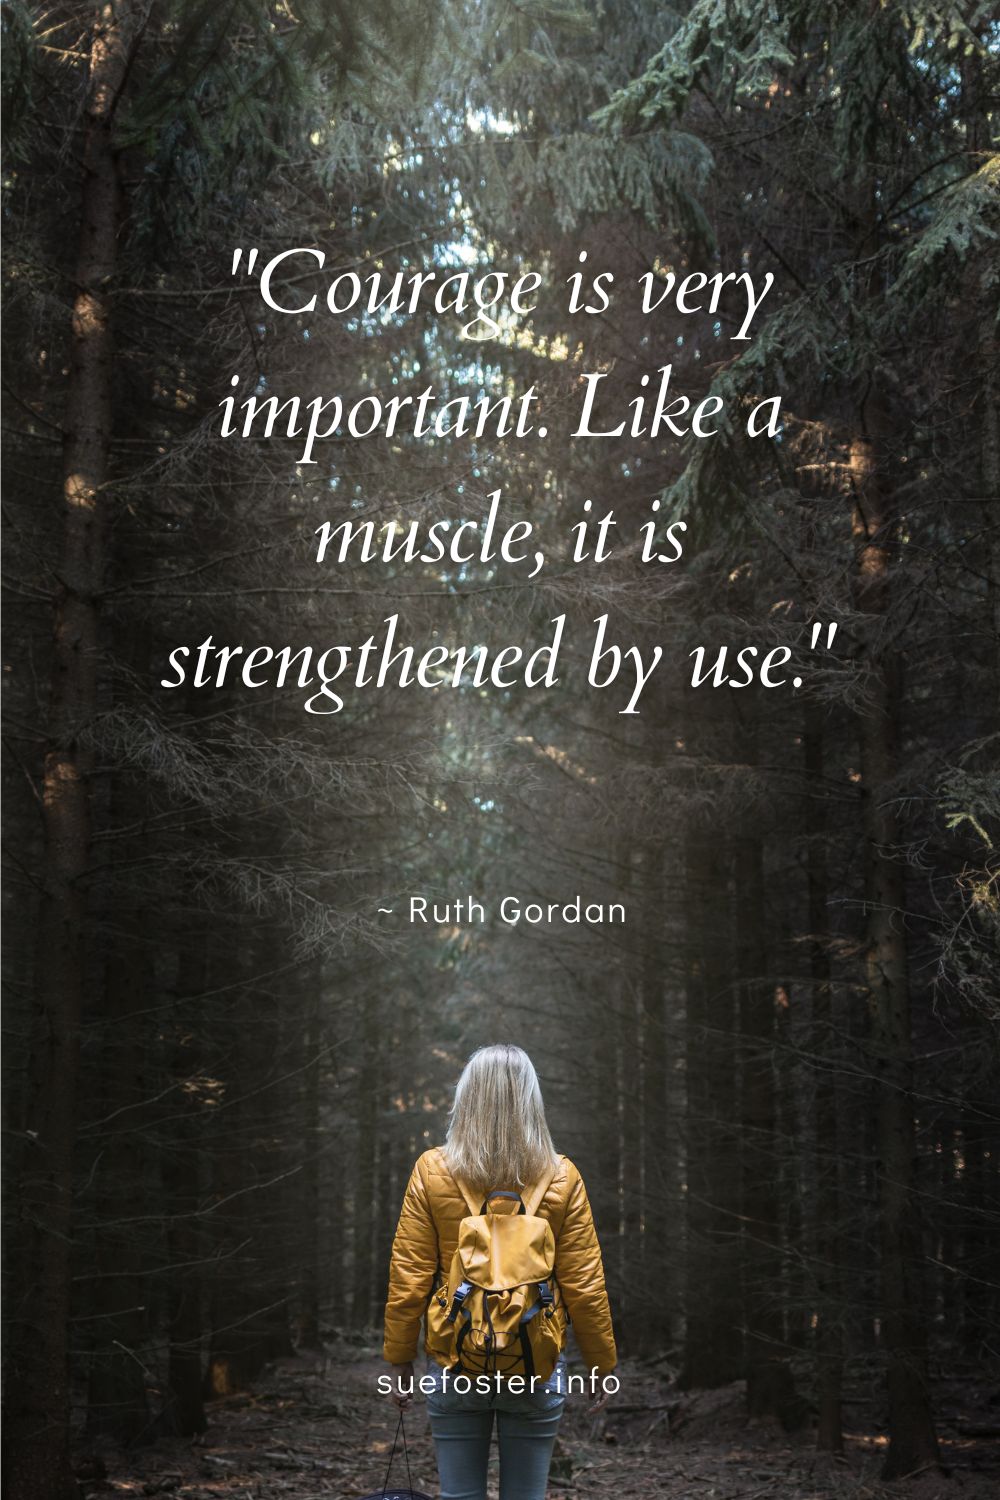 "Courage is very important. Like a muscle, it is strengthened by use." ~ Ruth Gordon